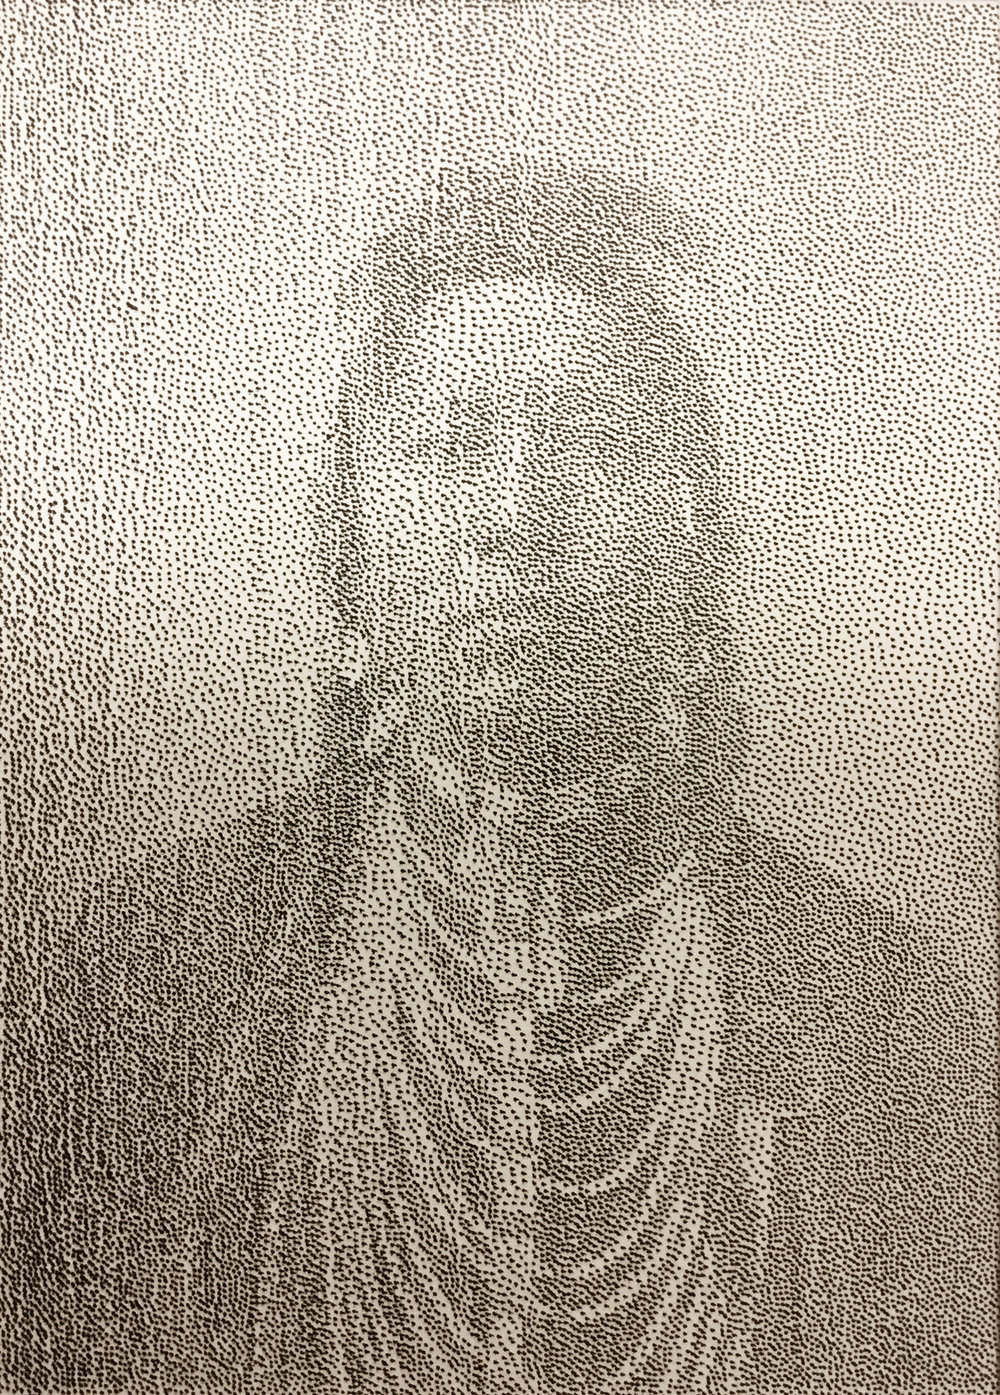 ‘’Chief Red Cloud’’